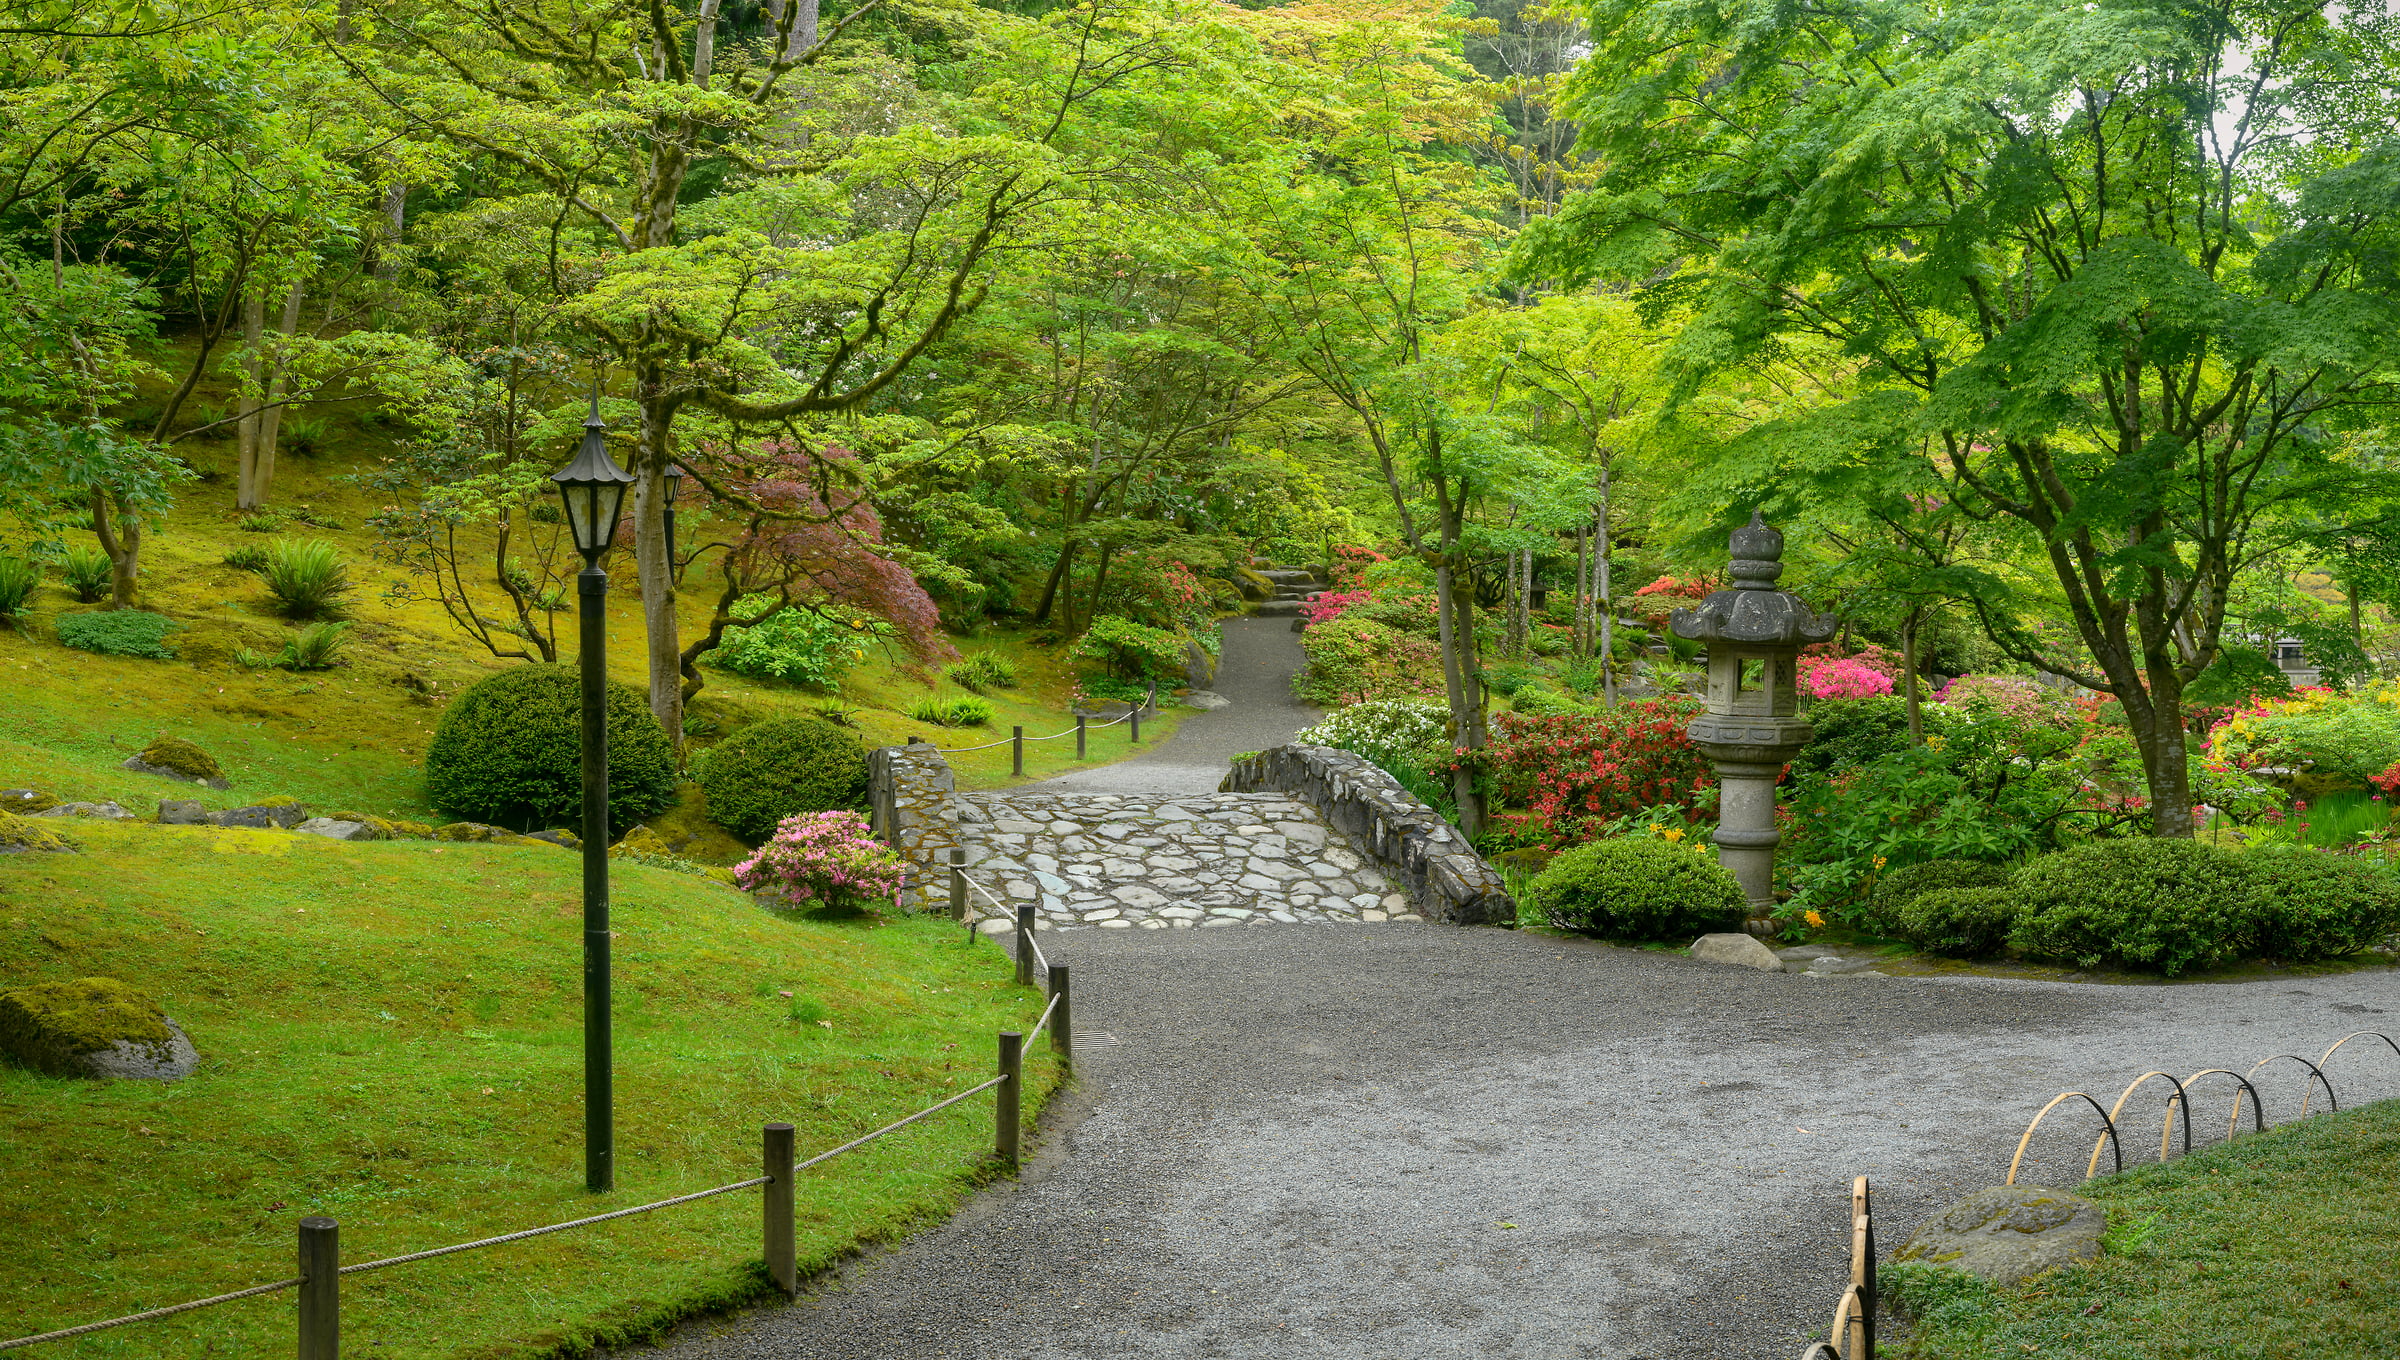 153 megapixels! A very high resolution, large-format VAST photo print of a Japanese garden with green foliage and a walkway; photograph created by Greg Probst in Japanese Garden, Seattle.